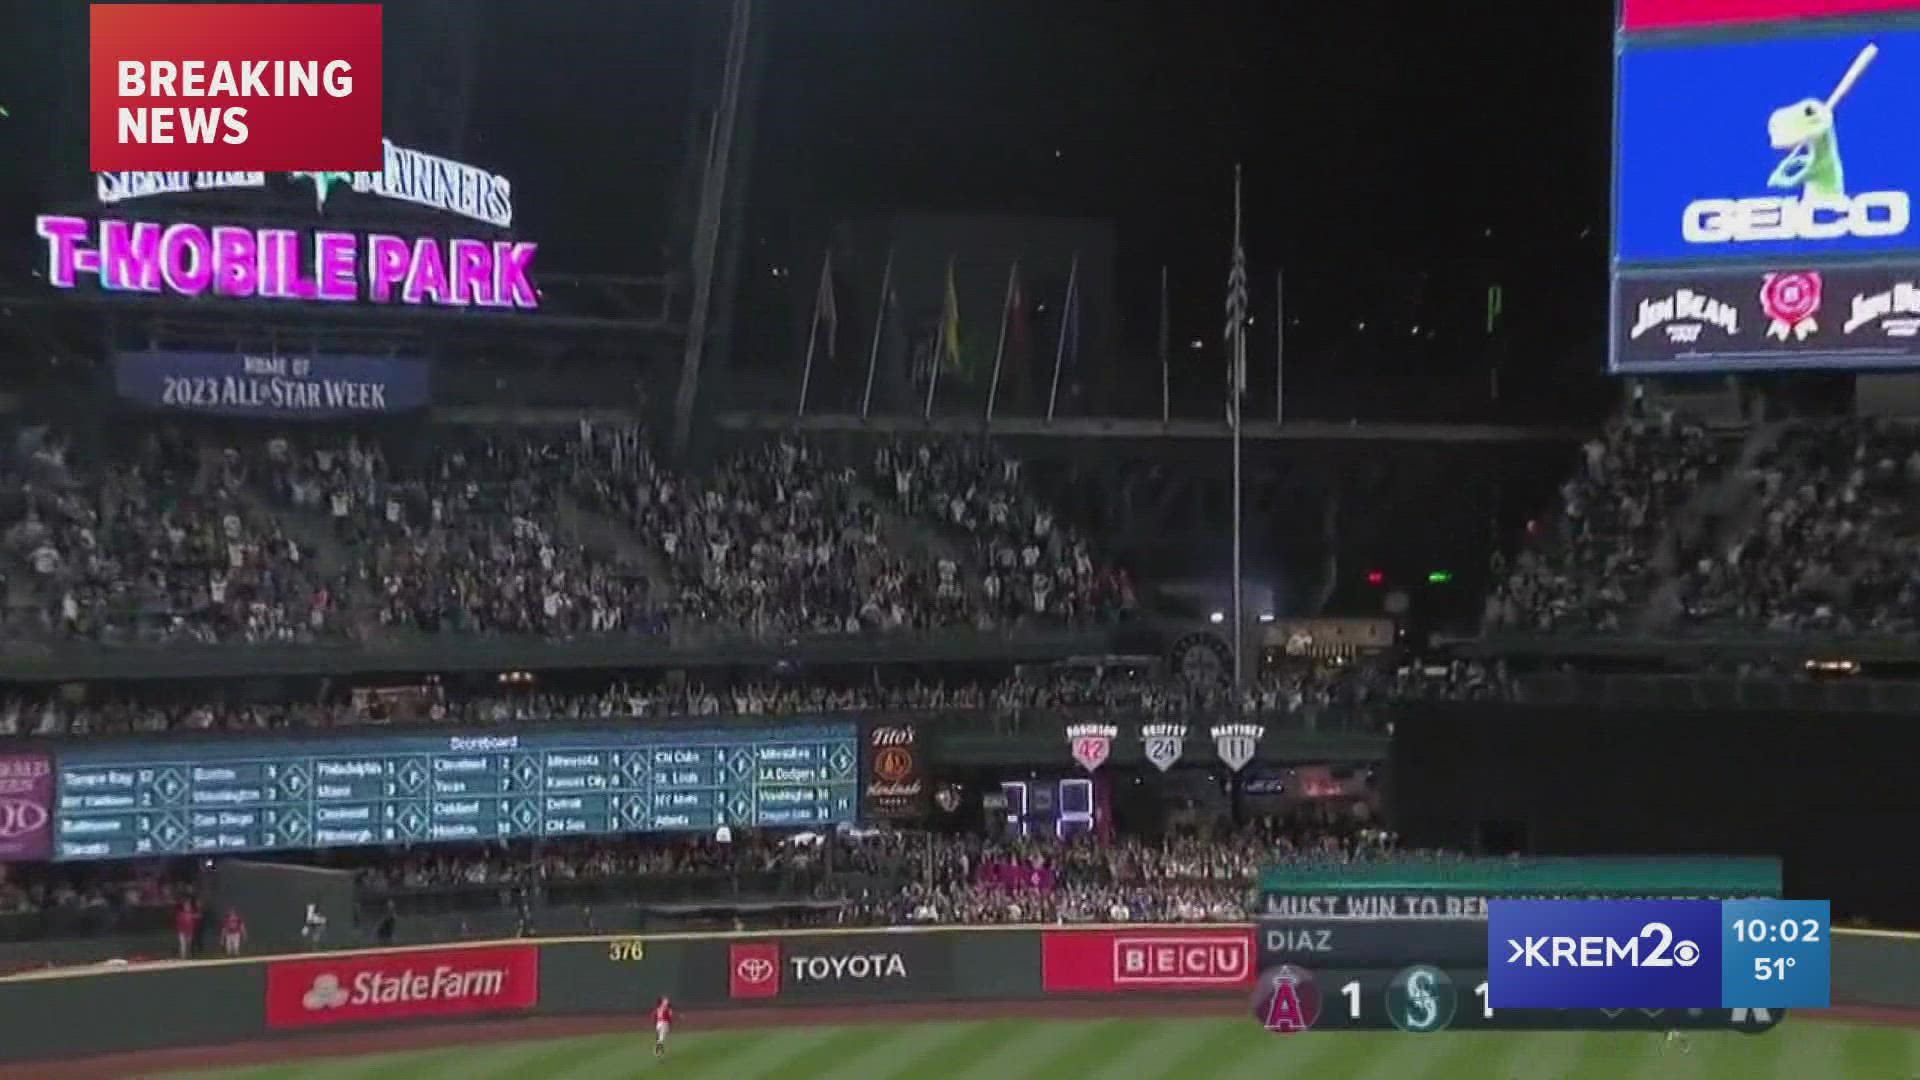 The Seattle Mariners secure another win but does that mean they are going to the playoffs?